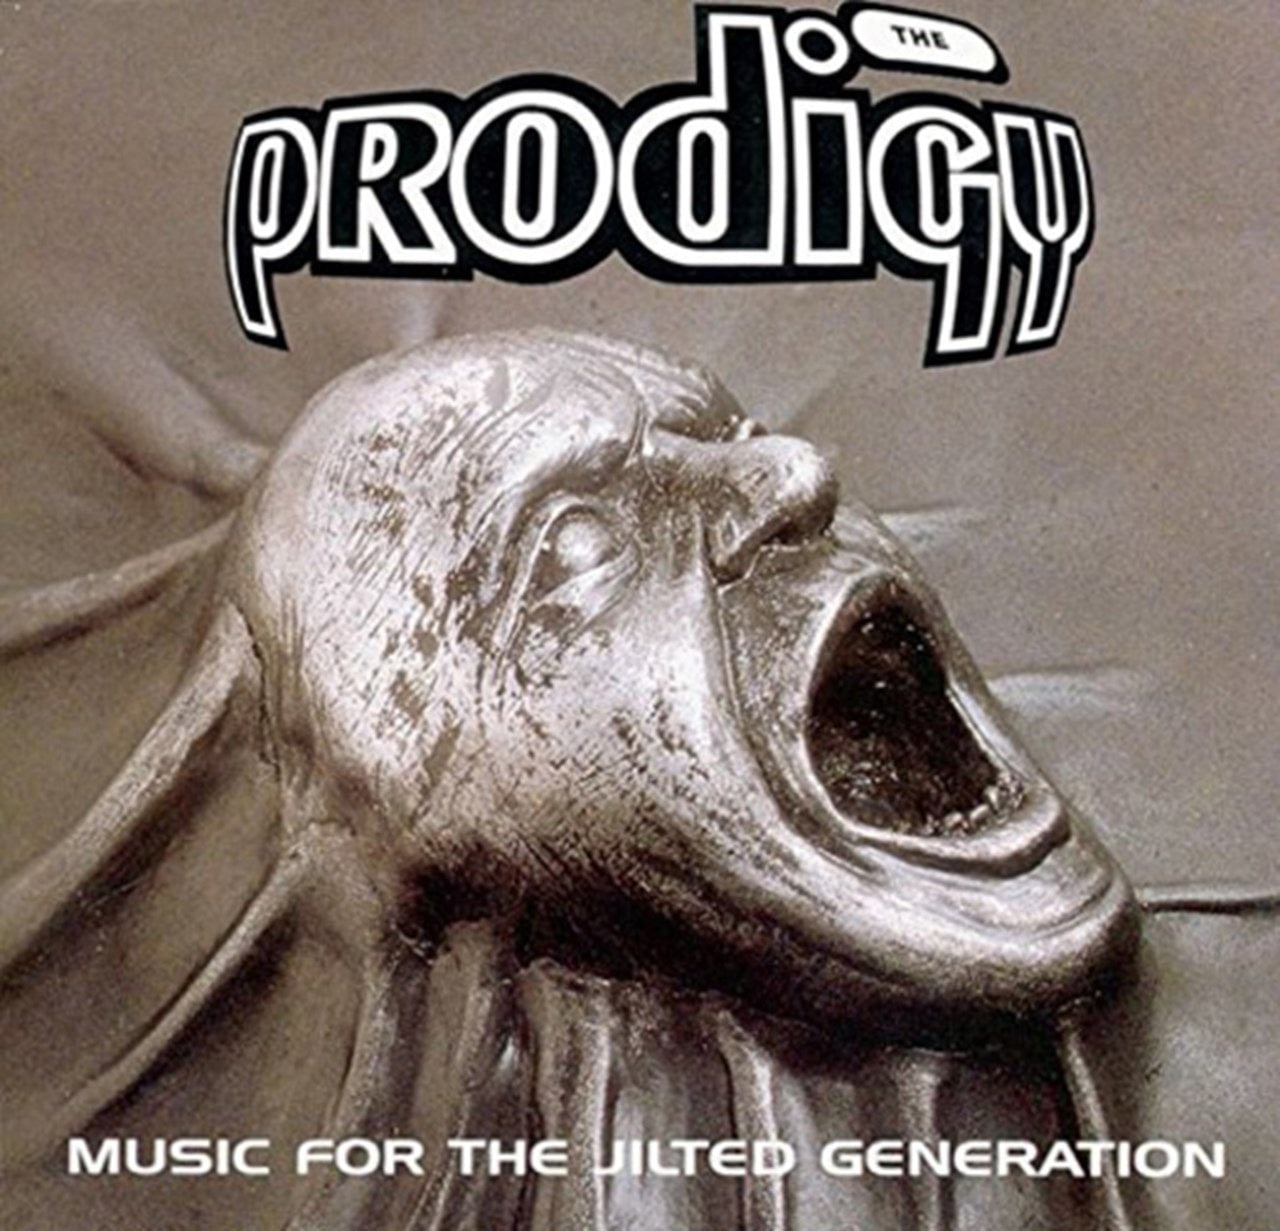 The Prodigy - Music For The Jilted Generation (2LP)